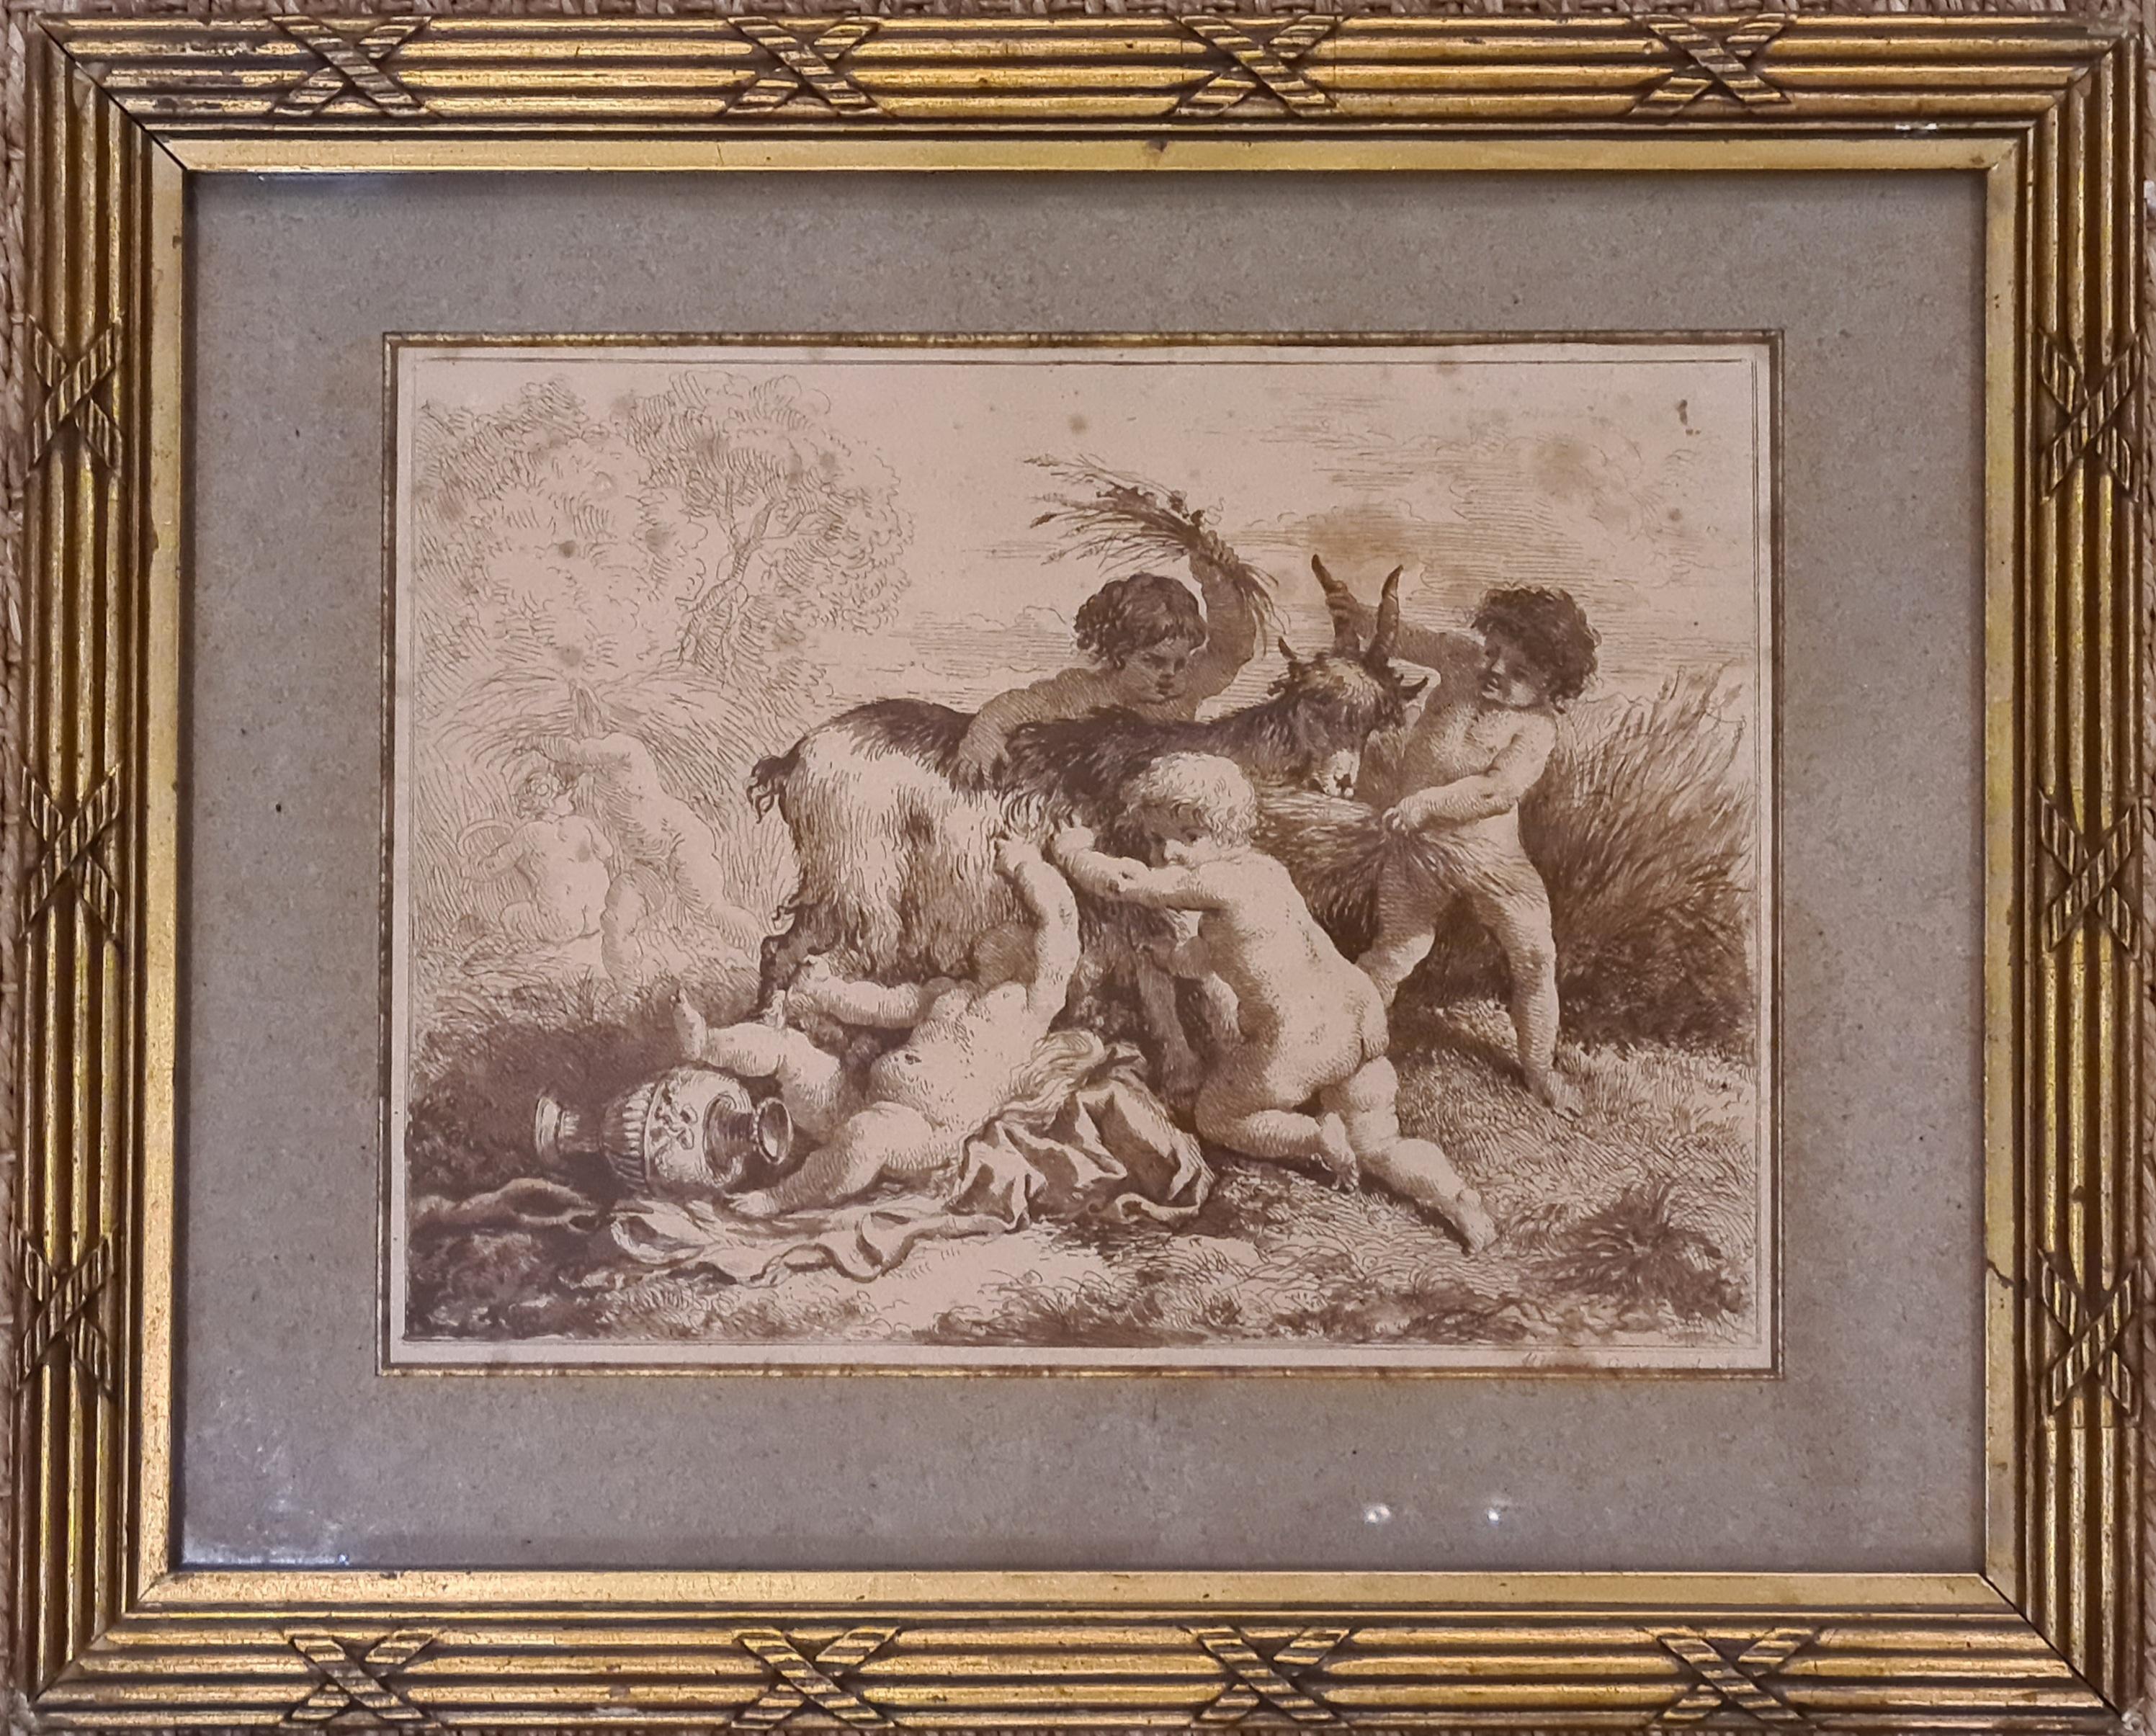 Jean-Jacques Lagrenée The Younger Nude Print - The Harvest, Cherubs Disporting with a Goat, Fine Framed 18th Century Engraving